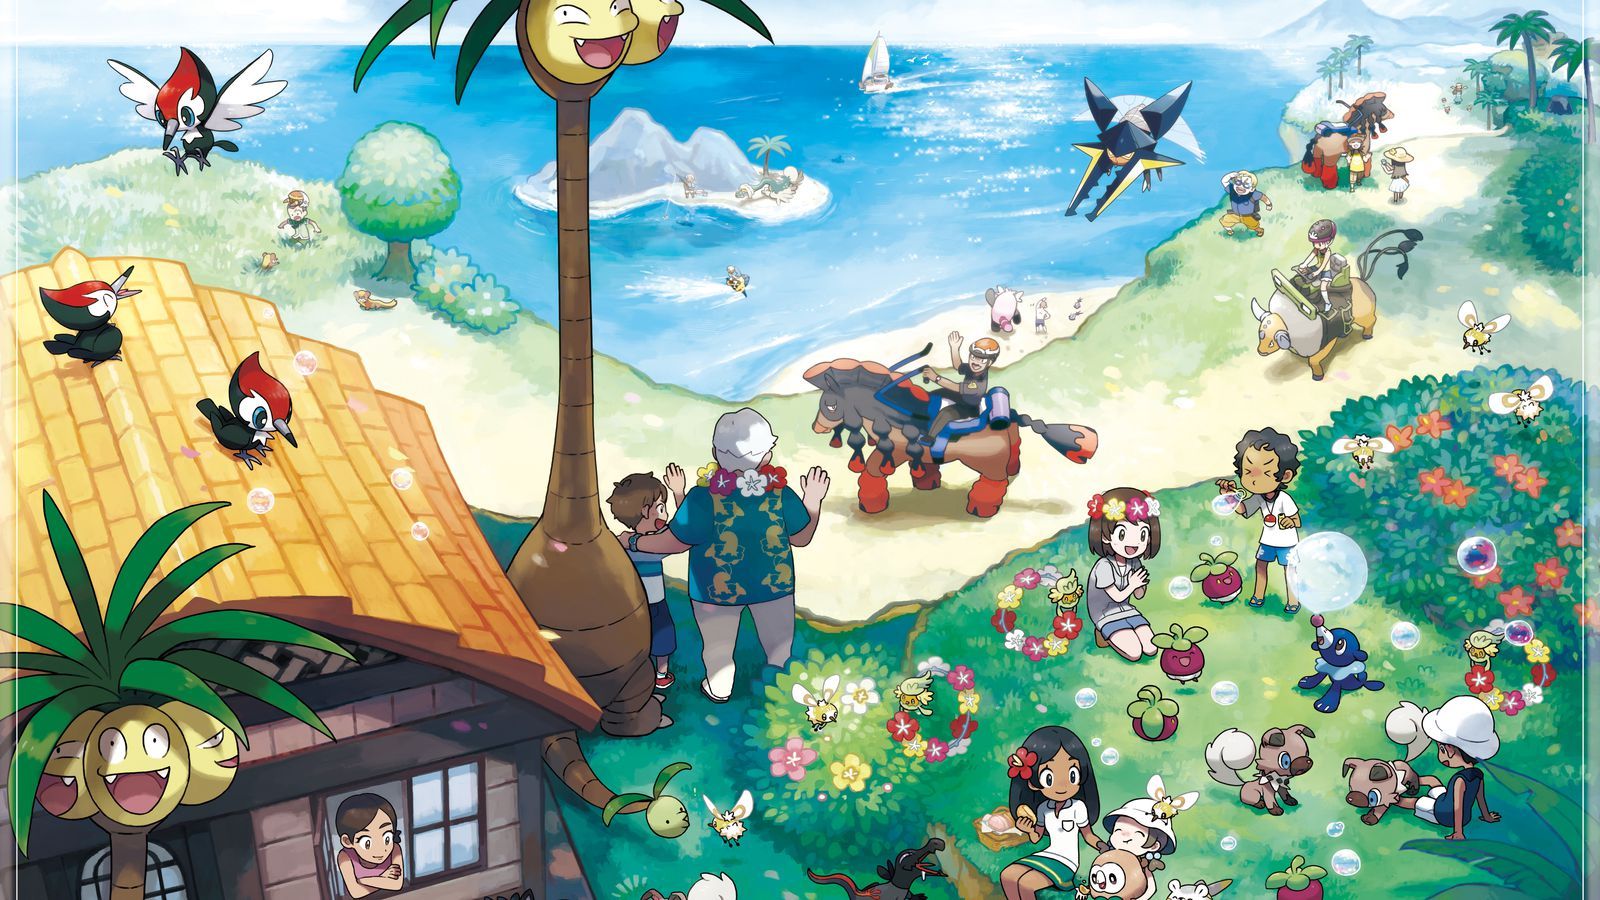 Pokémon Sun And Moon Are Nintendo's Fastest Selling Games Ever In Europe And The Americas